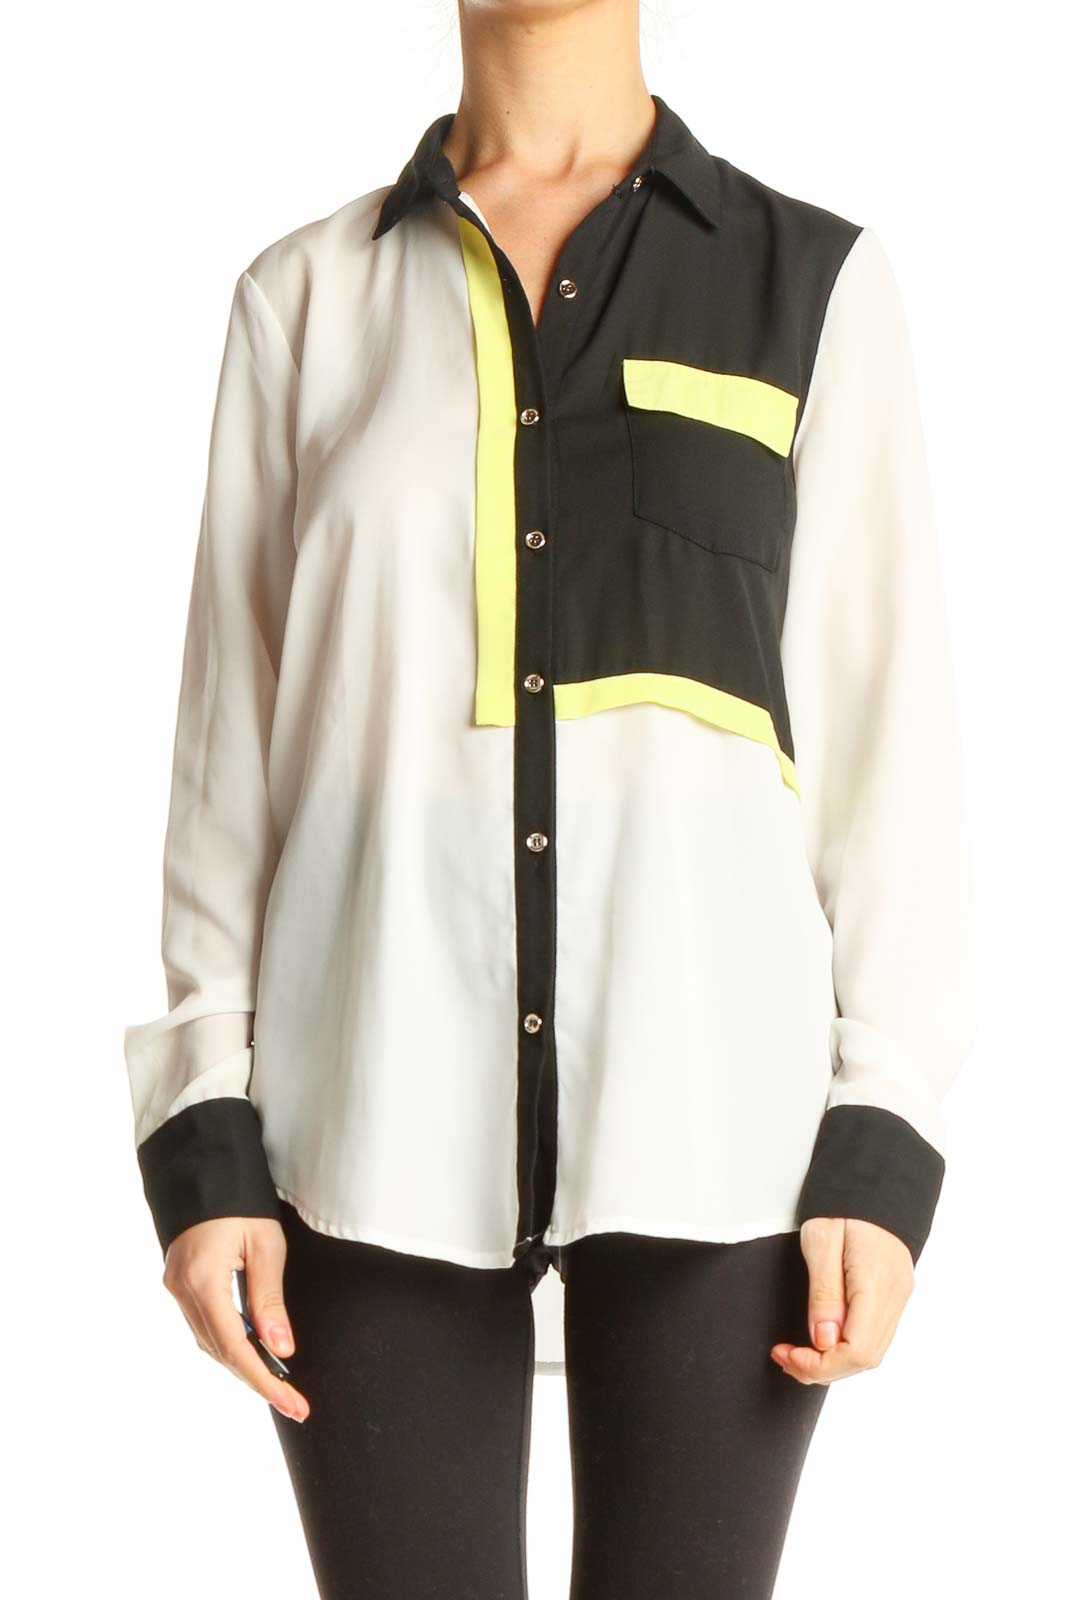 White Colorblock Work Shirt Front